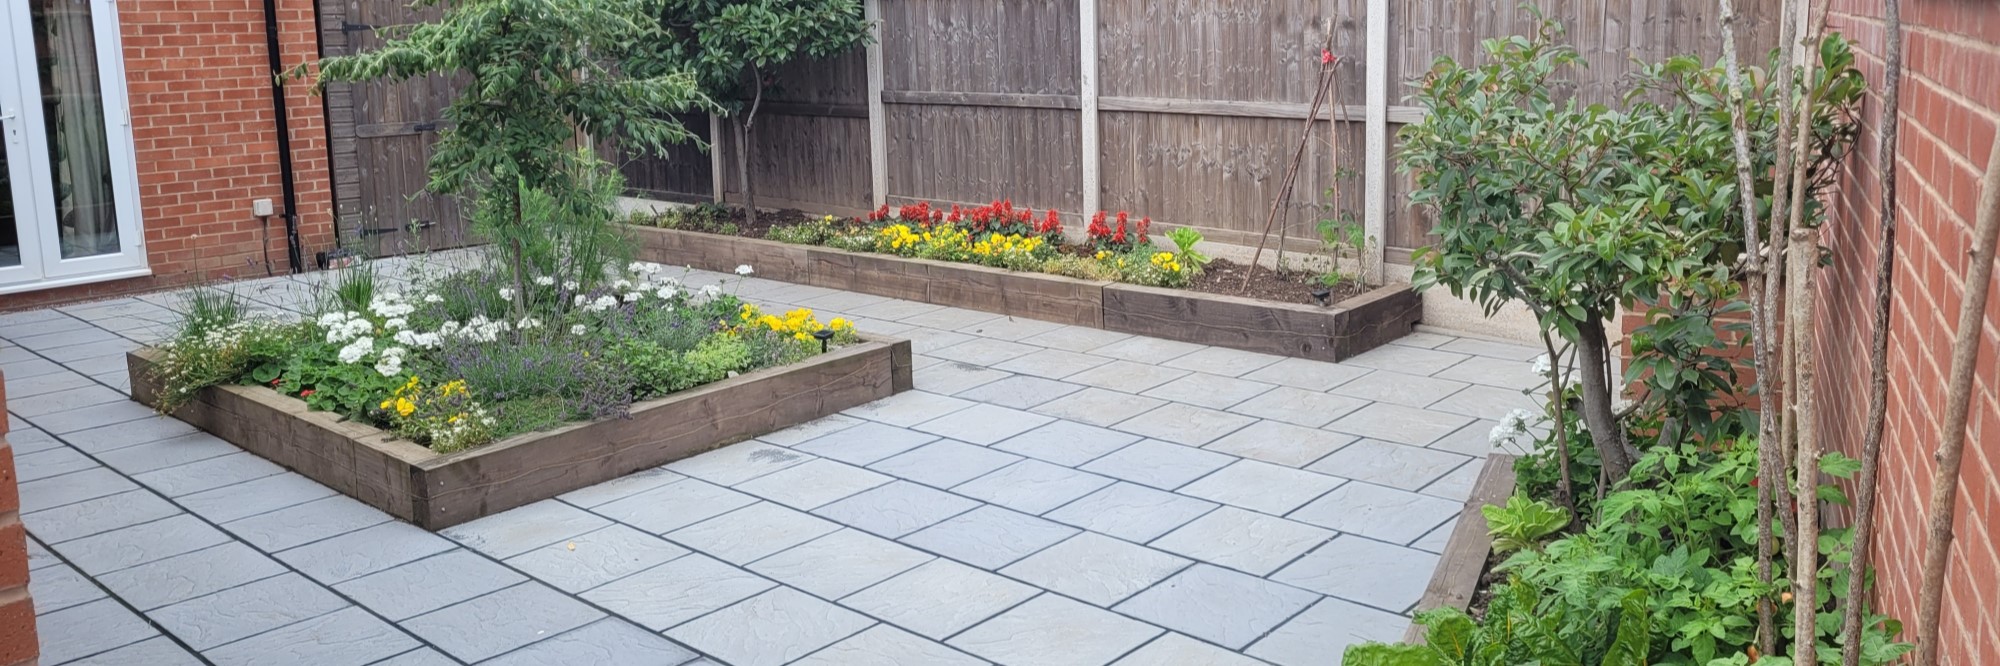 Patios pathways DG Services Landscaping gardening Bromsgrove Droitwich